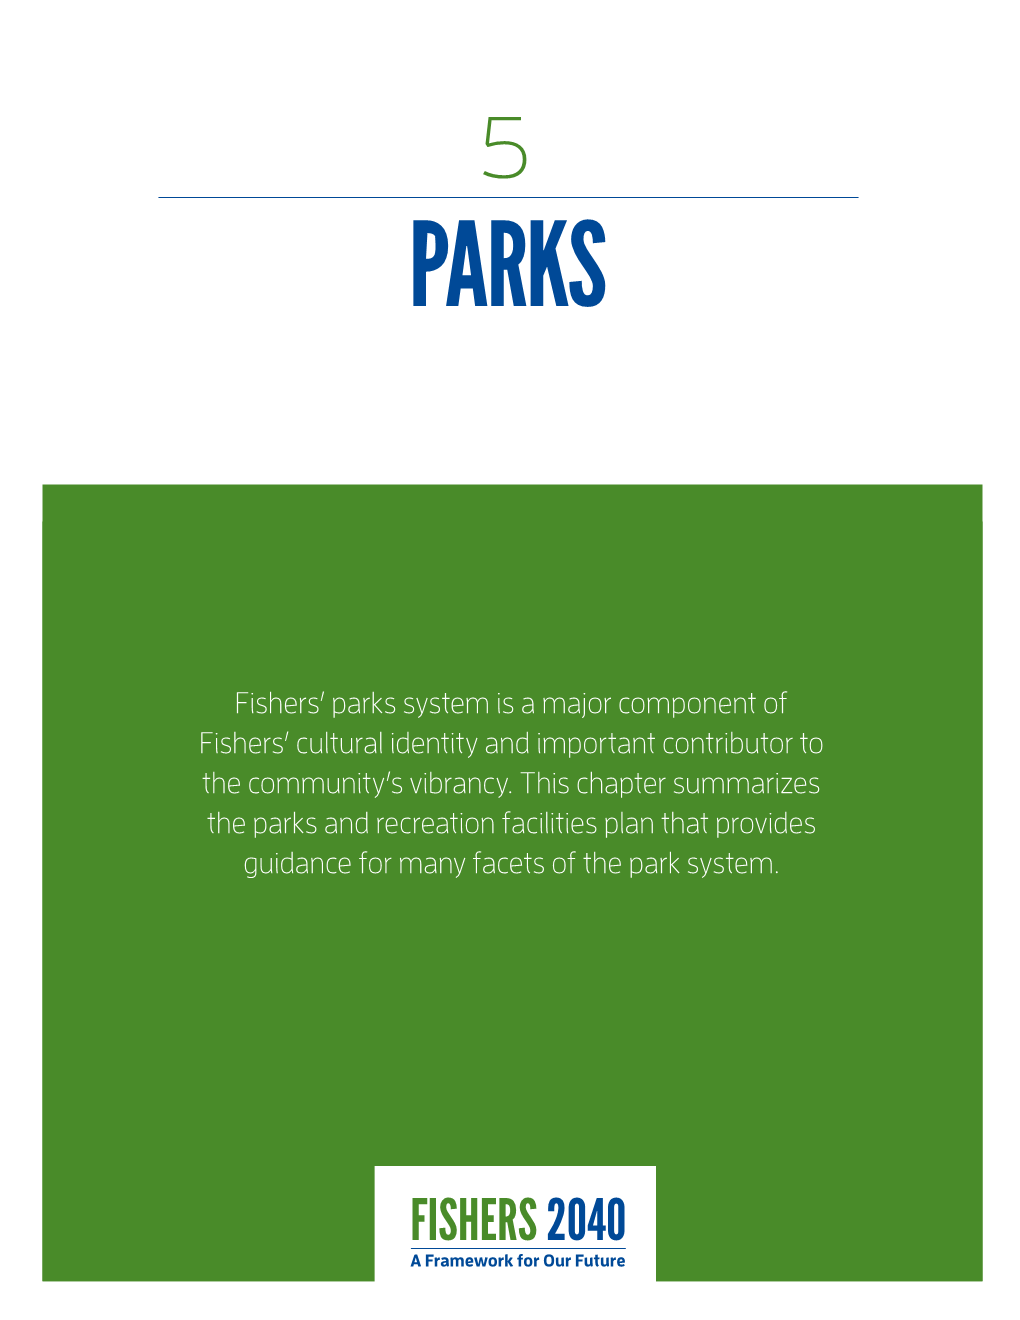 Fishers' Parks System Is a Major Component of Fishers' Cultural